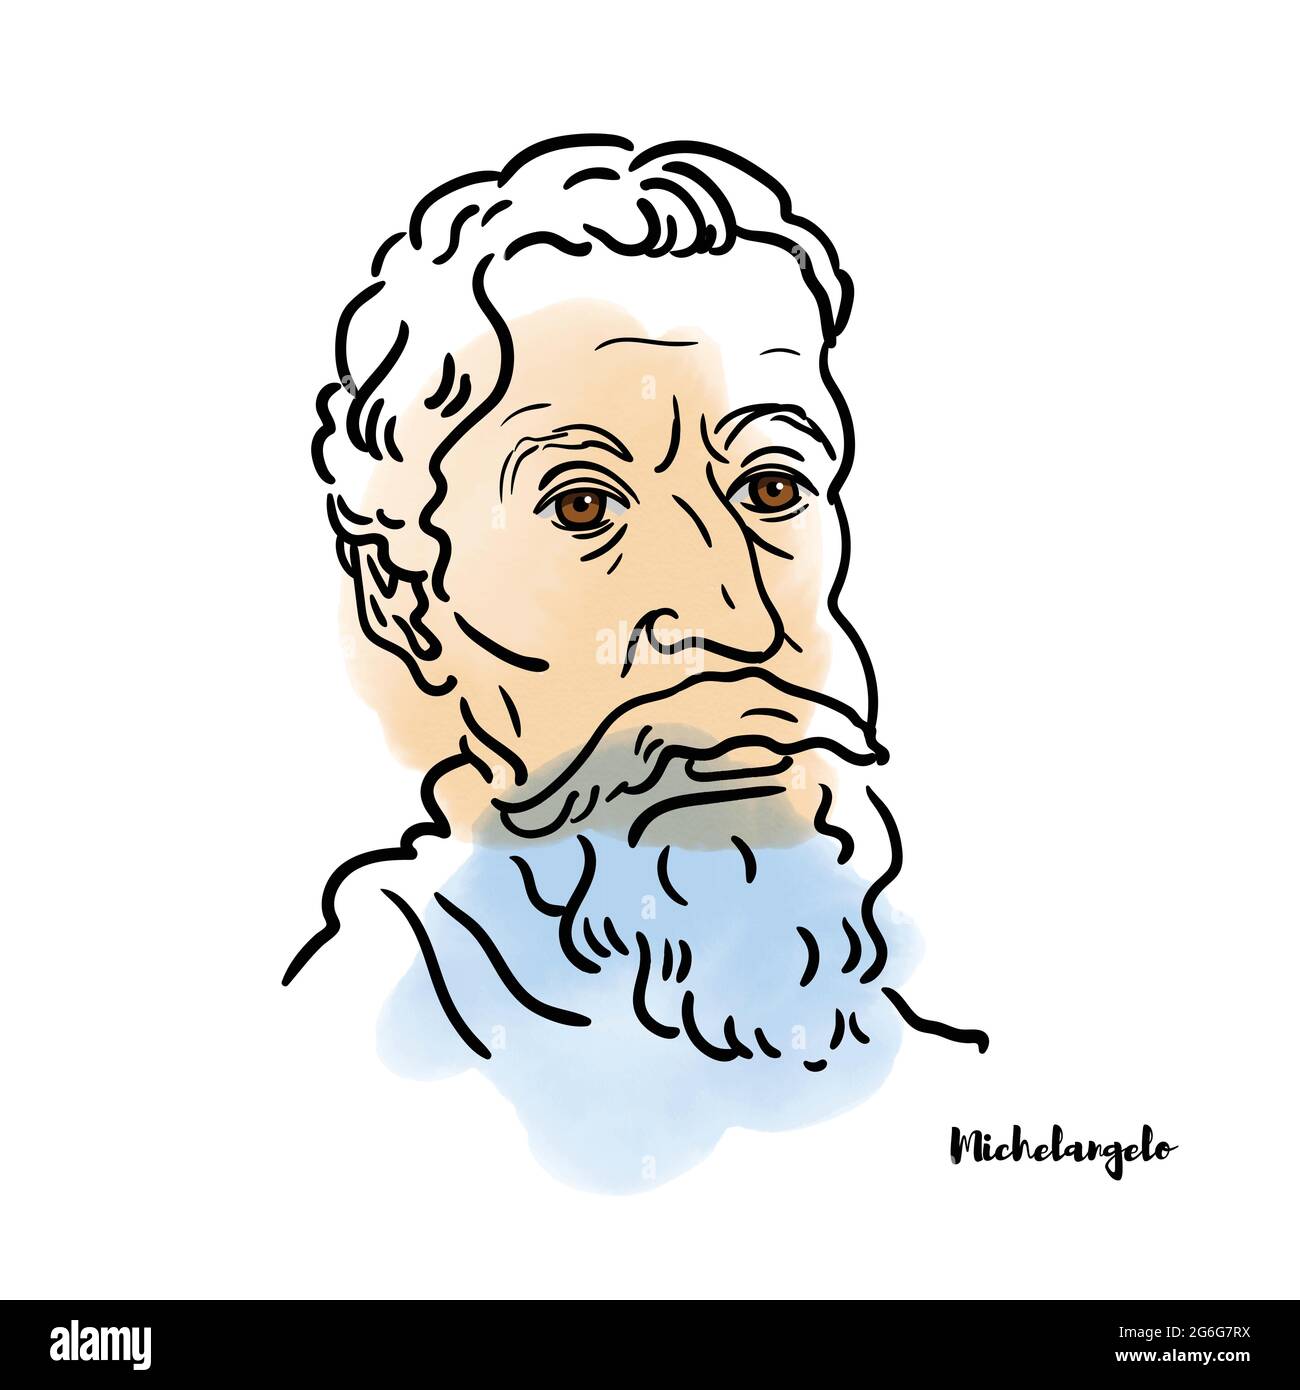 Famous artist Michelangelo vector hand drawn watercolor portrait with ink contours. Italian sculptor, painter, architect and poet of the High Renaissa Stock Vector